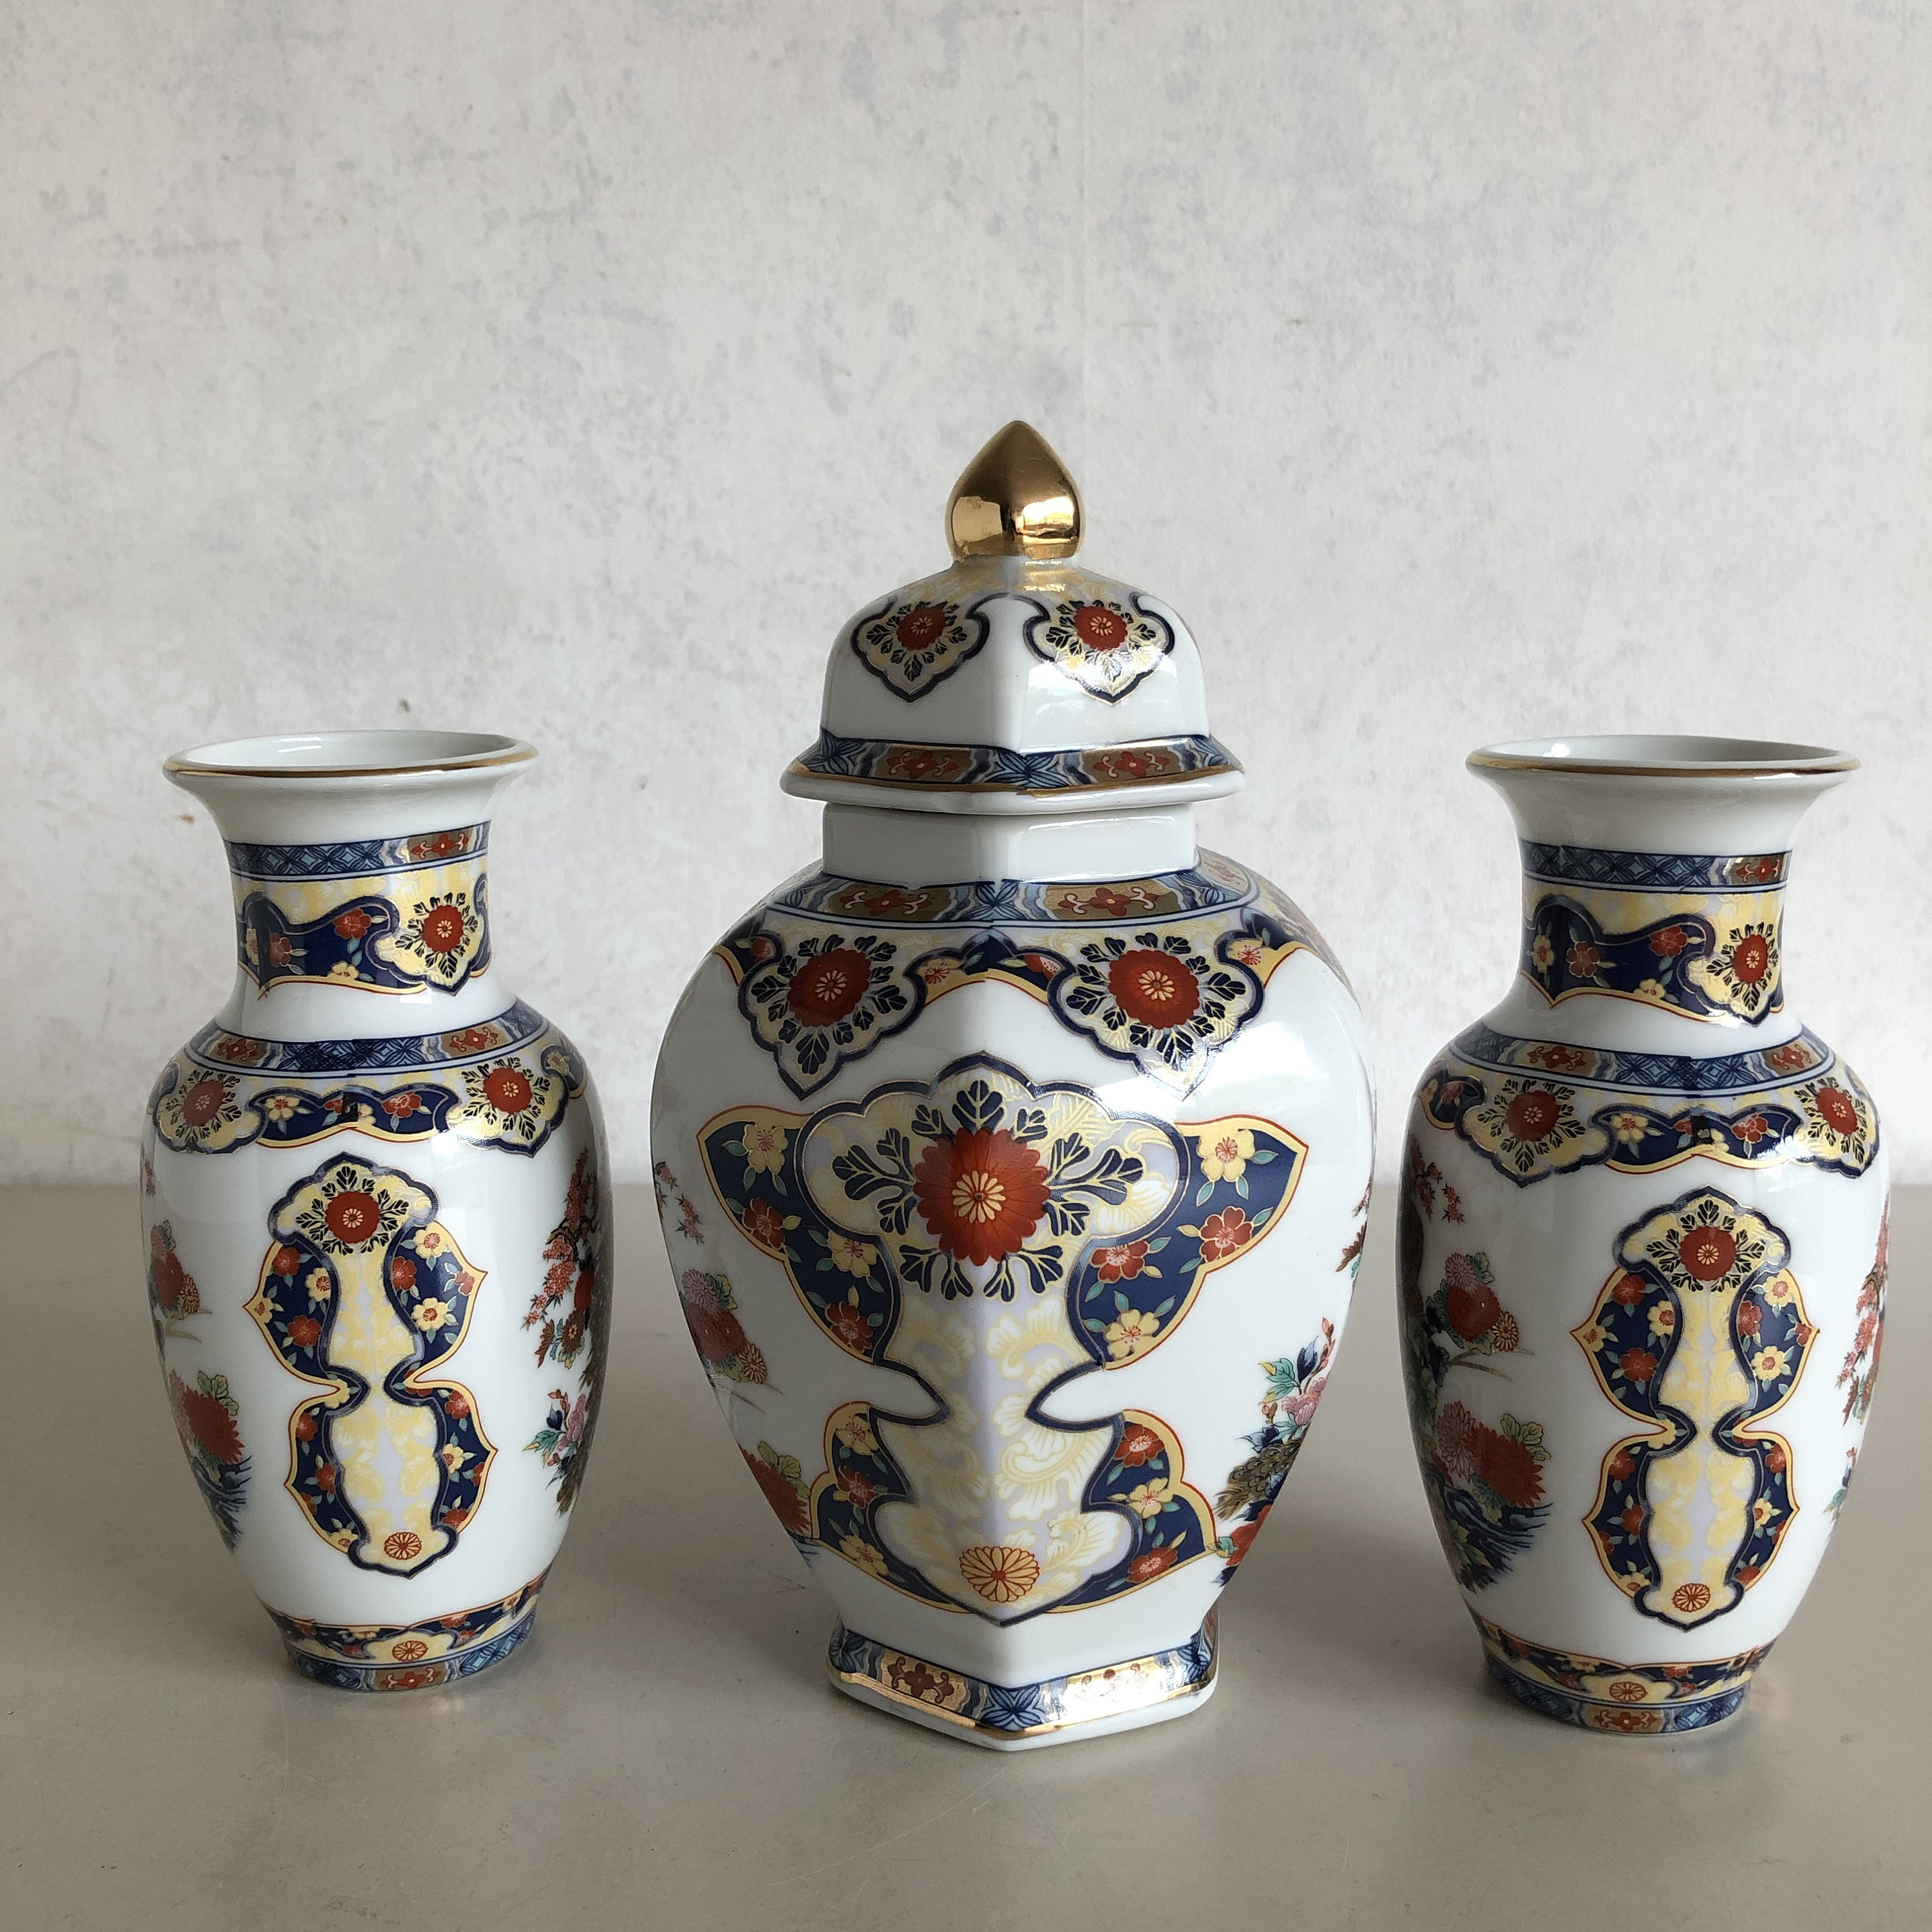 TWO HANDLE VASE 10.6 INCHES DELFT RARE HAND PAINTED 